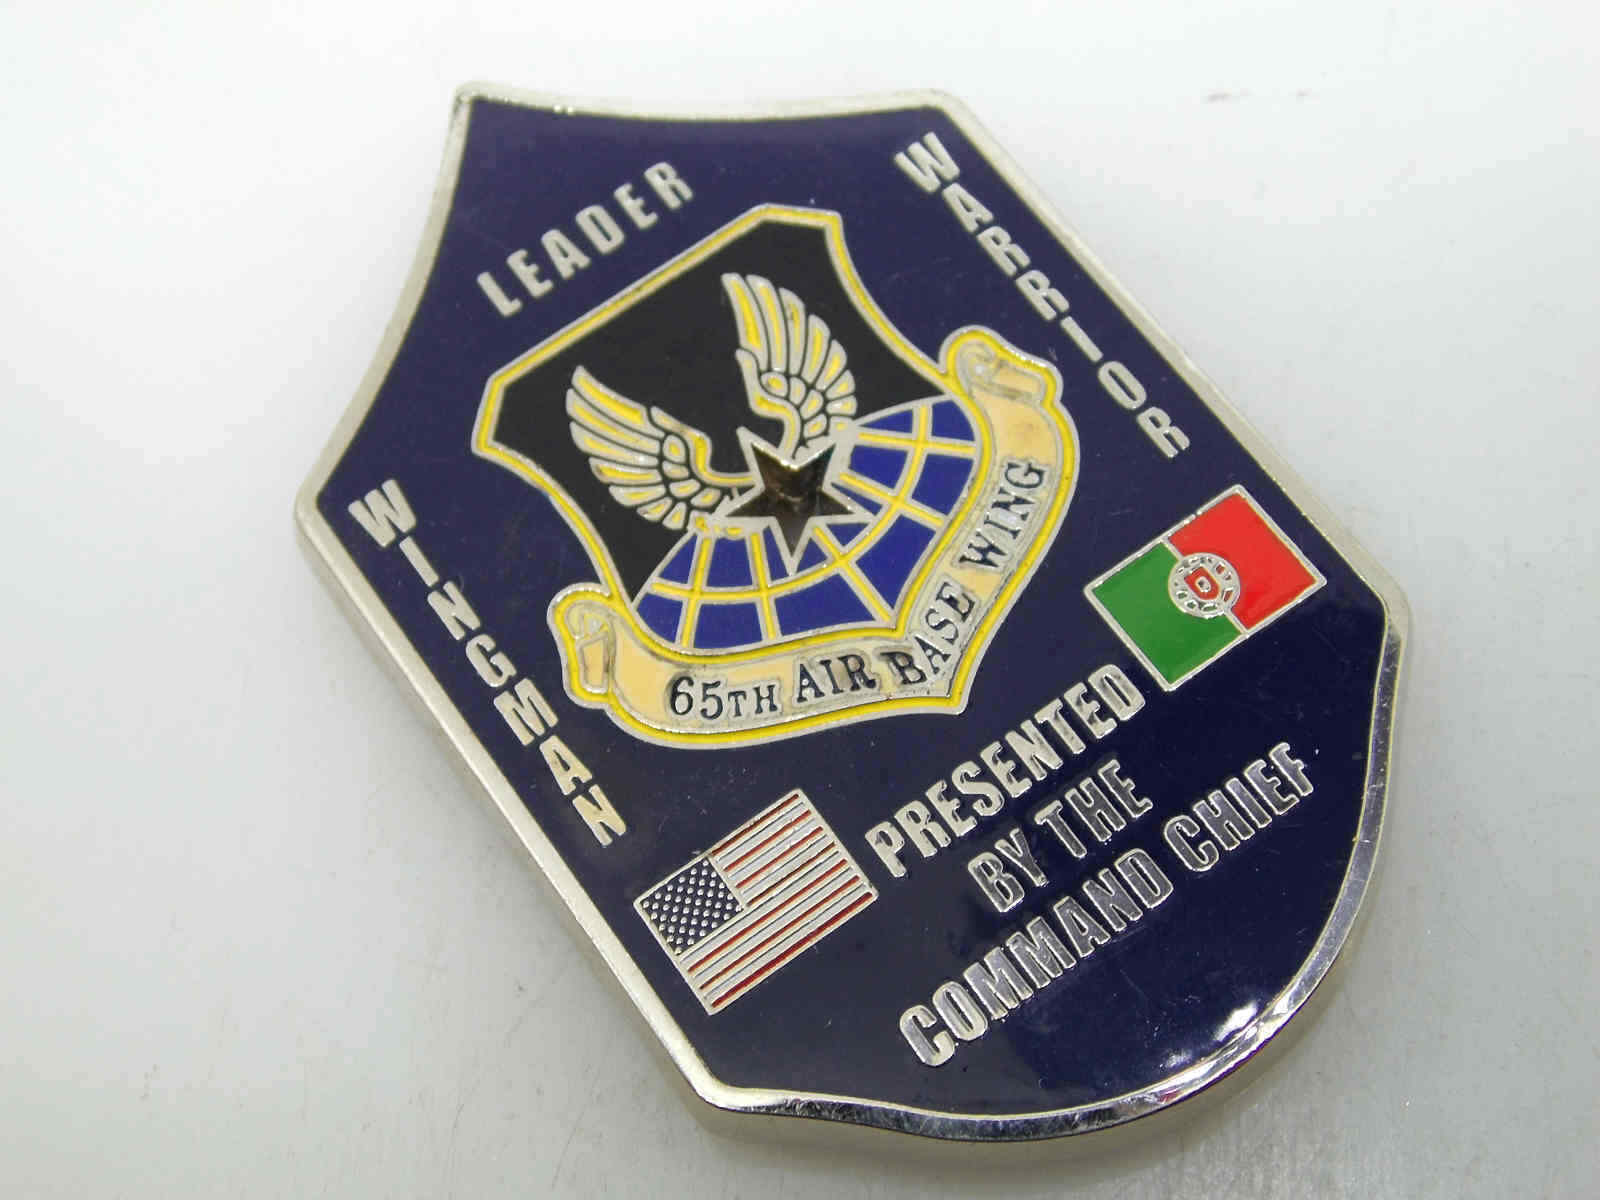 65TH AIR BASE WING COMMAND CHIEF CHALLENGE COIN